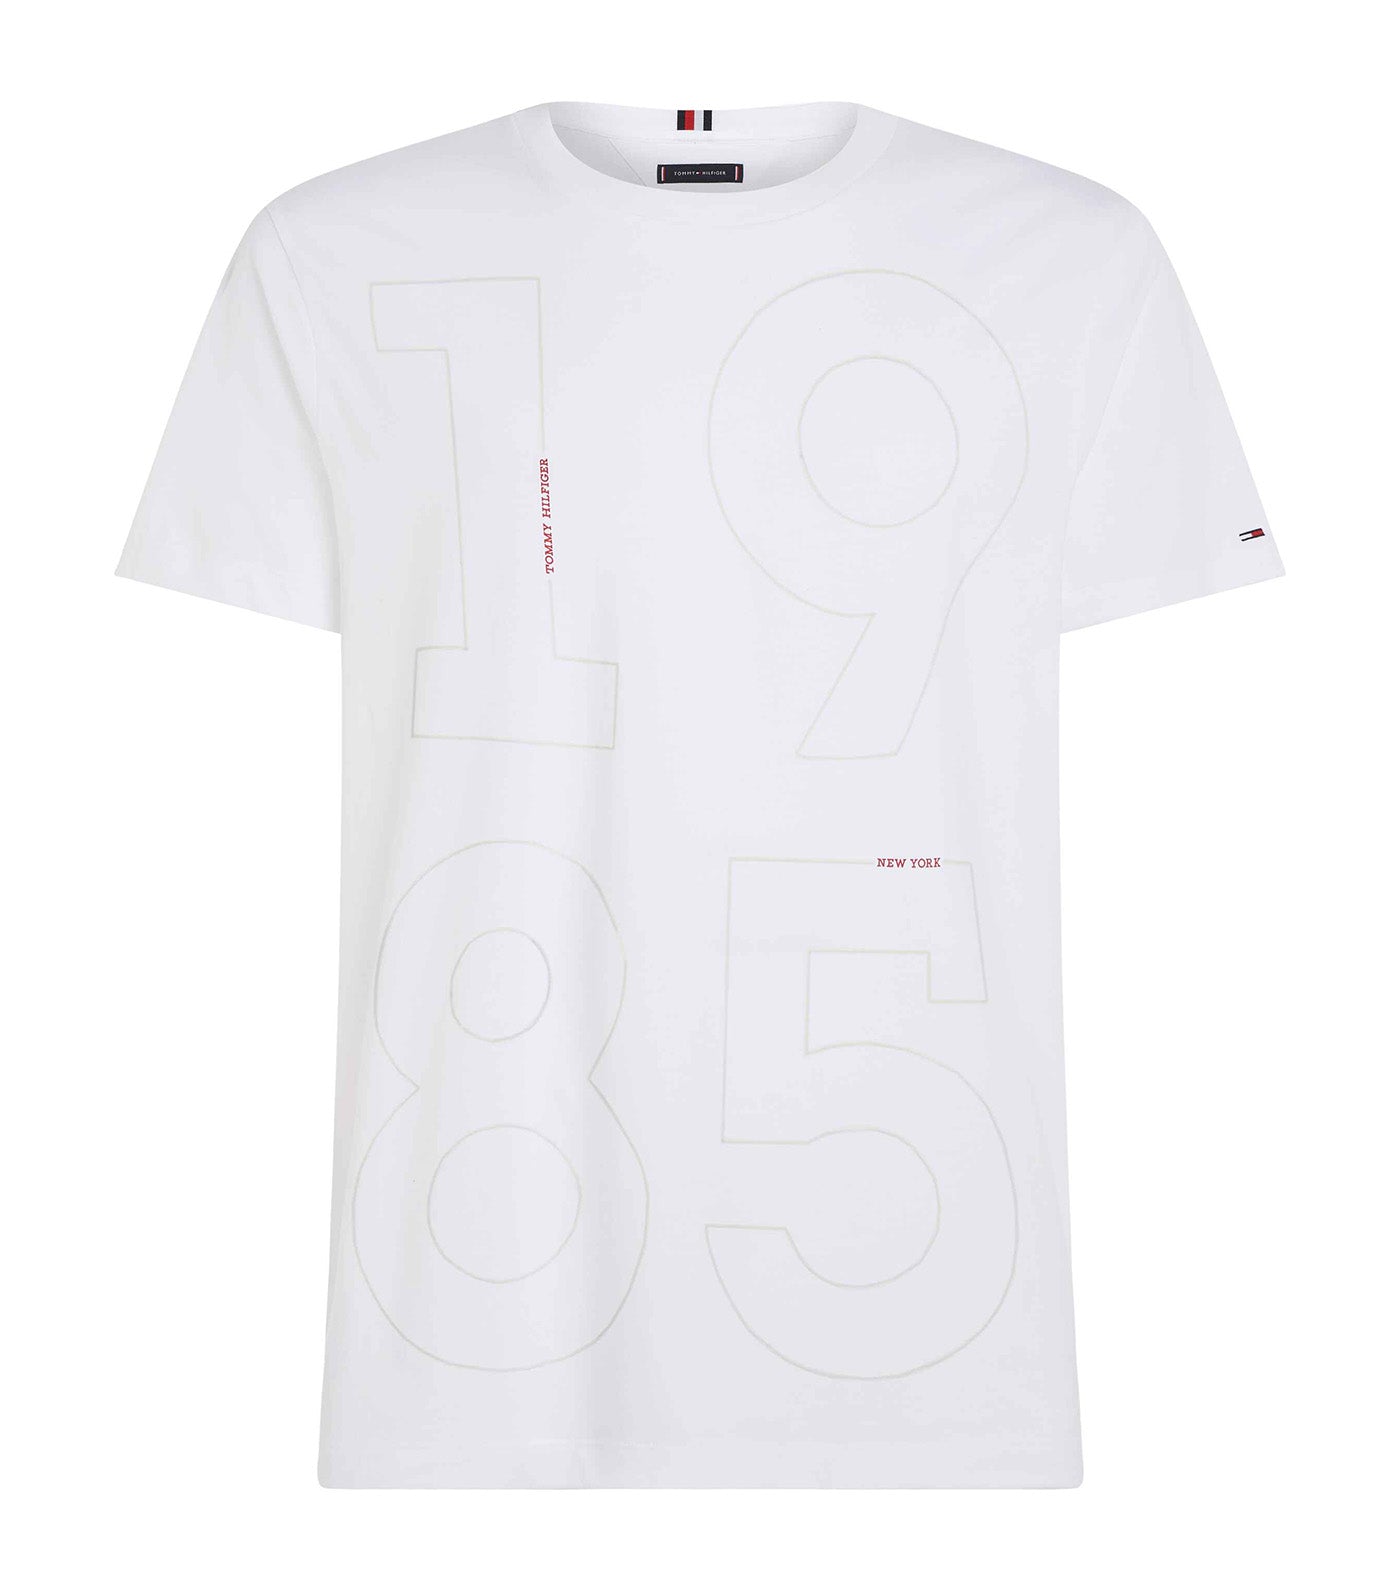 Men's Modern Placement Graphic T-Shirt White